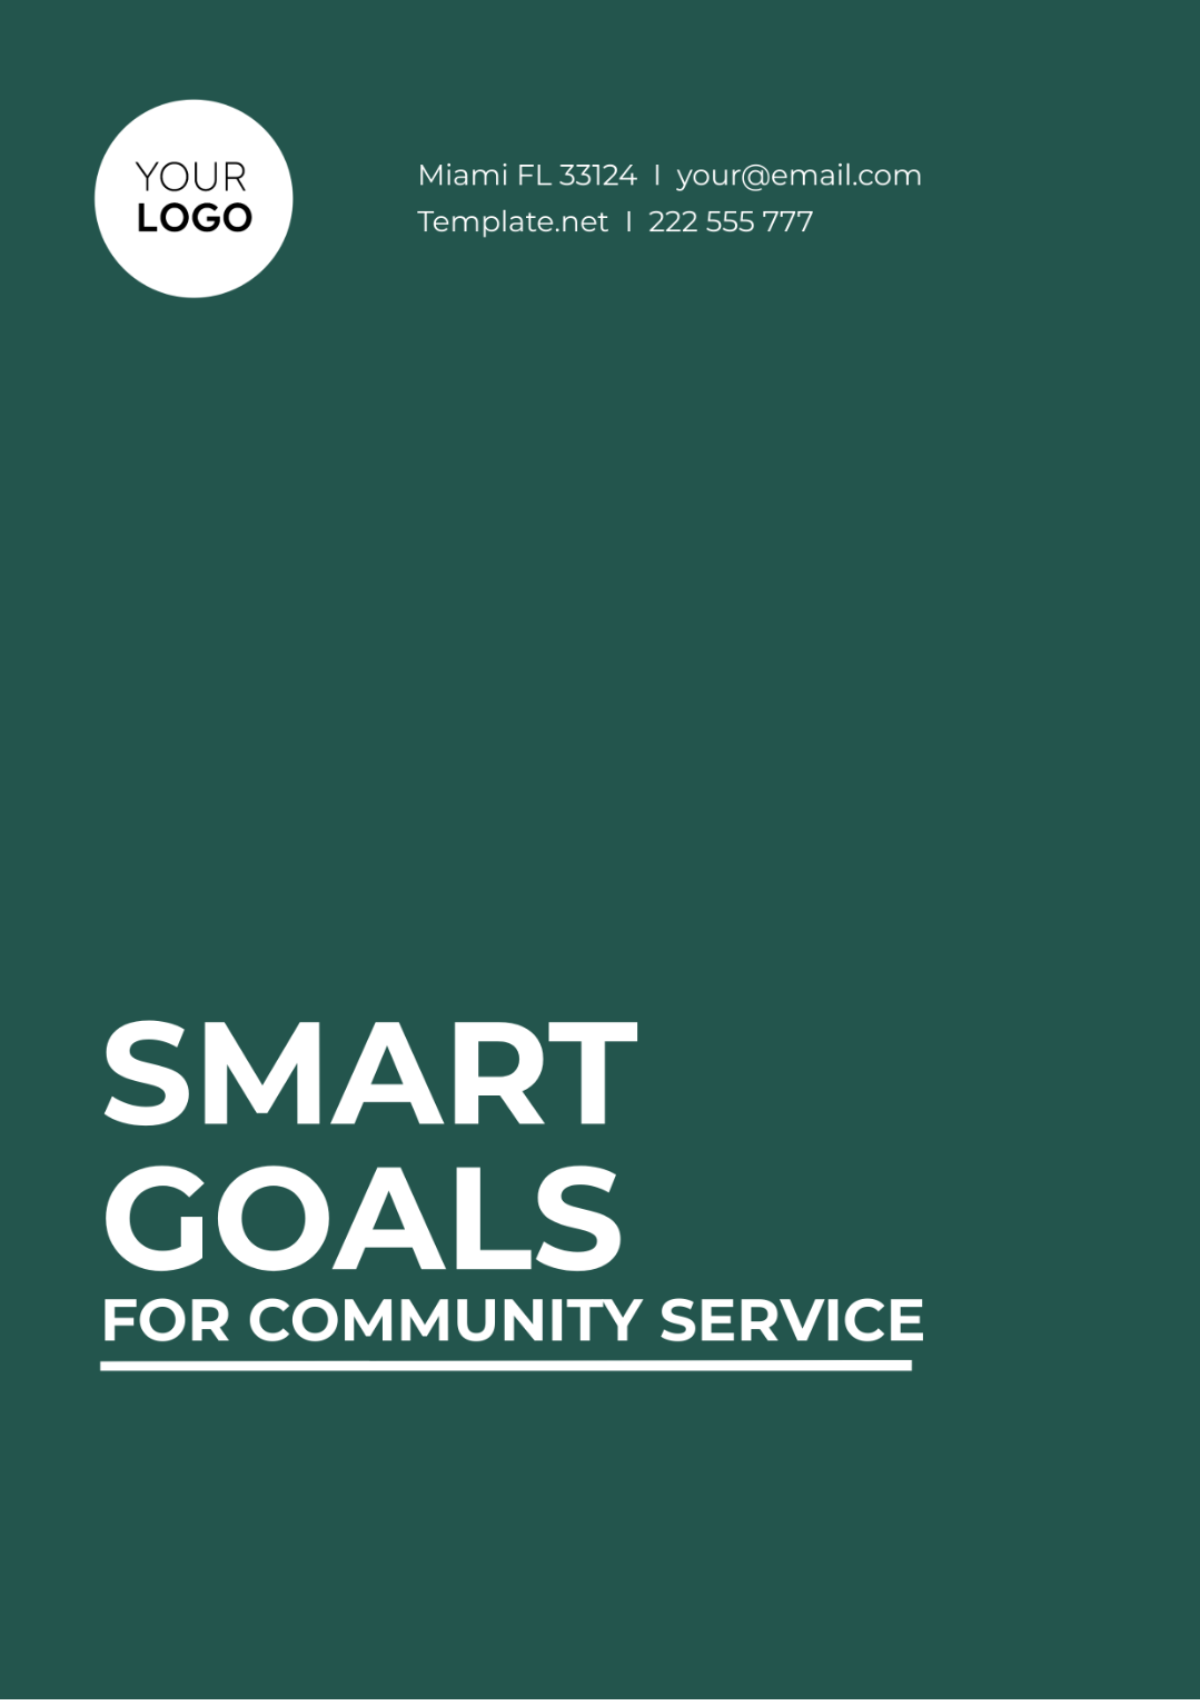 SMART Goals Template for Community Service